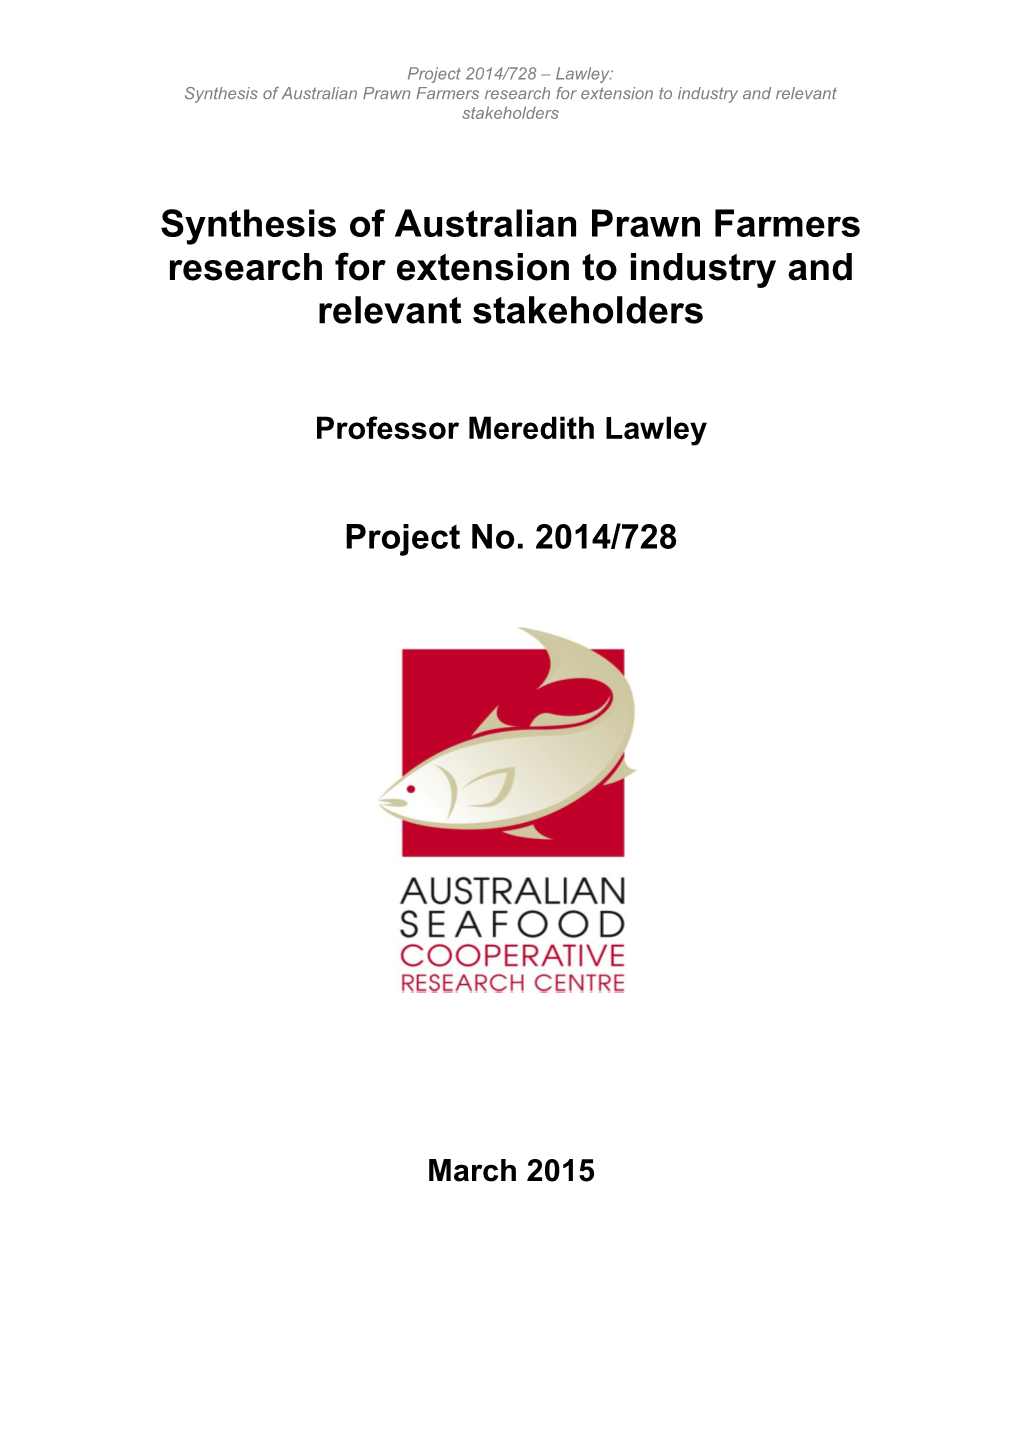 Synthesis of Australian Prawn Farmers Research for Extension to Industry Andrelevant